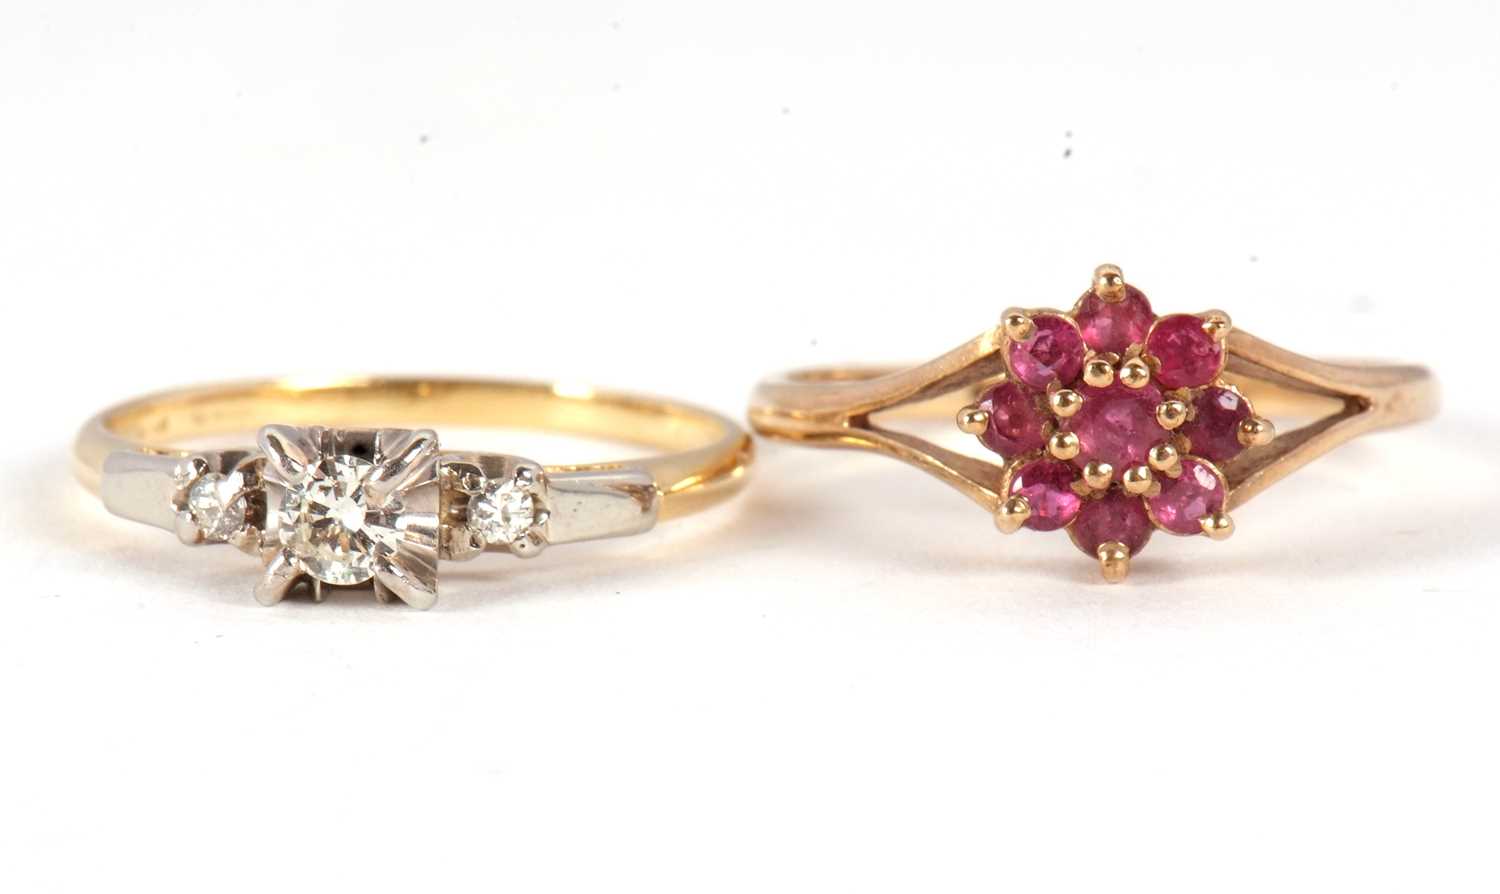 Two gemset rings, the first a three stone diamond ring in white metal mounts to a plain band of